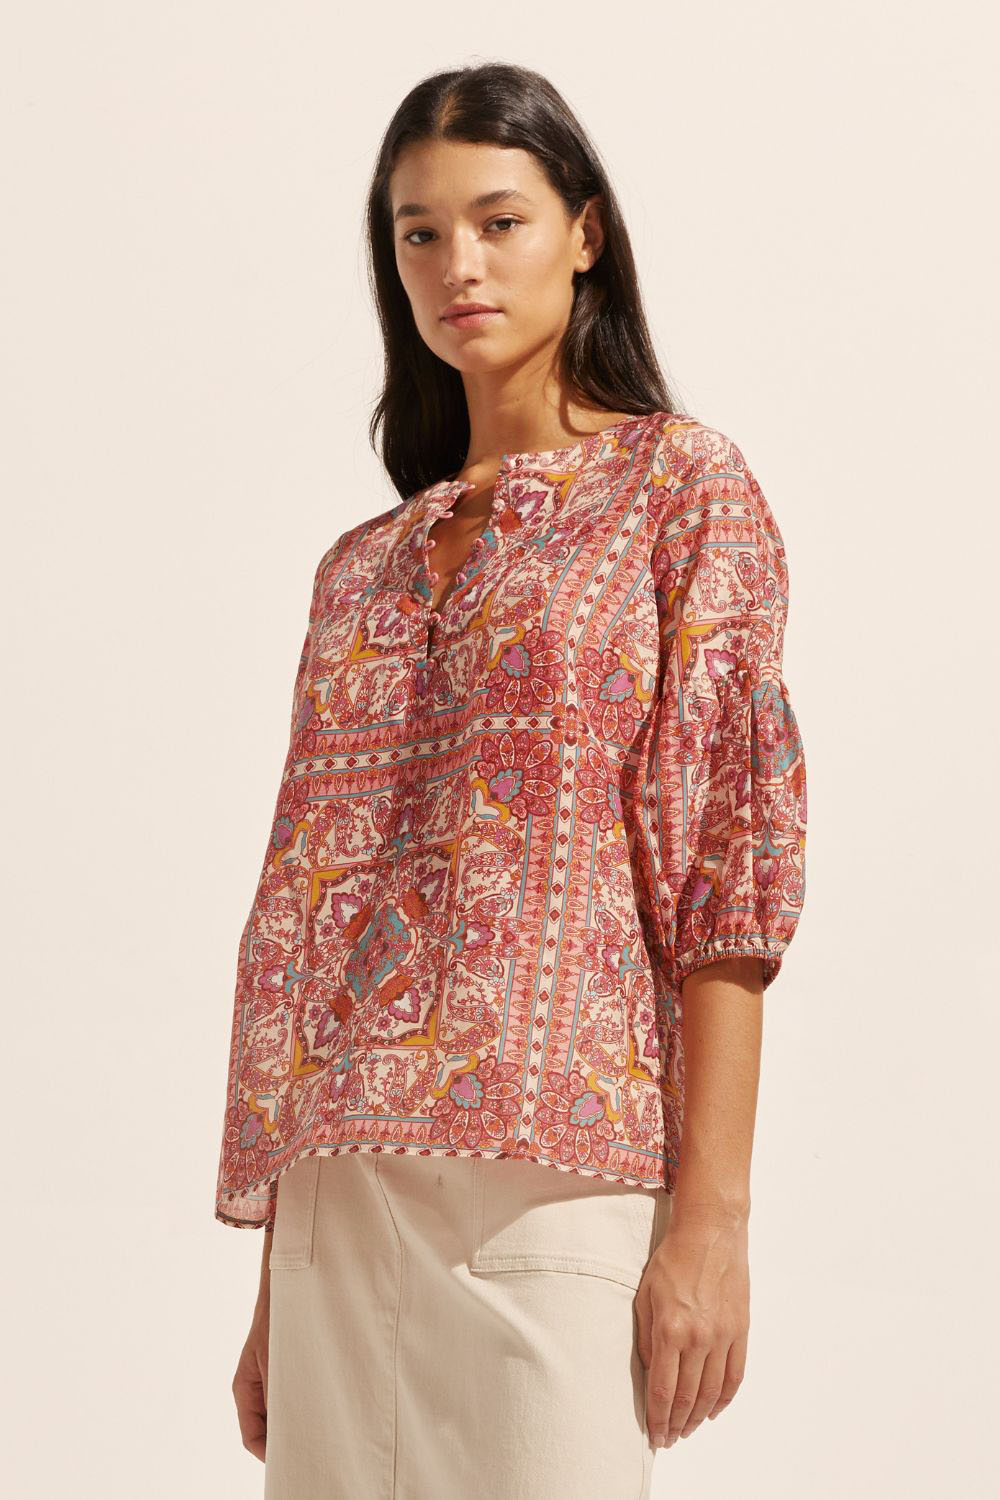 pink print, mid length sleeve, round neckline, covered buttons, small side splits, top, side image